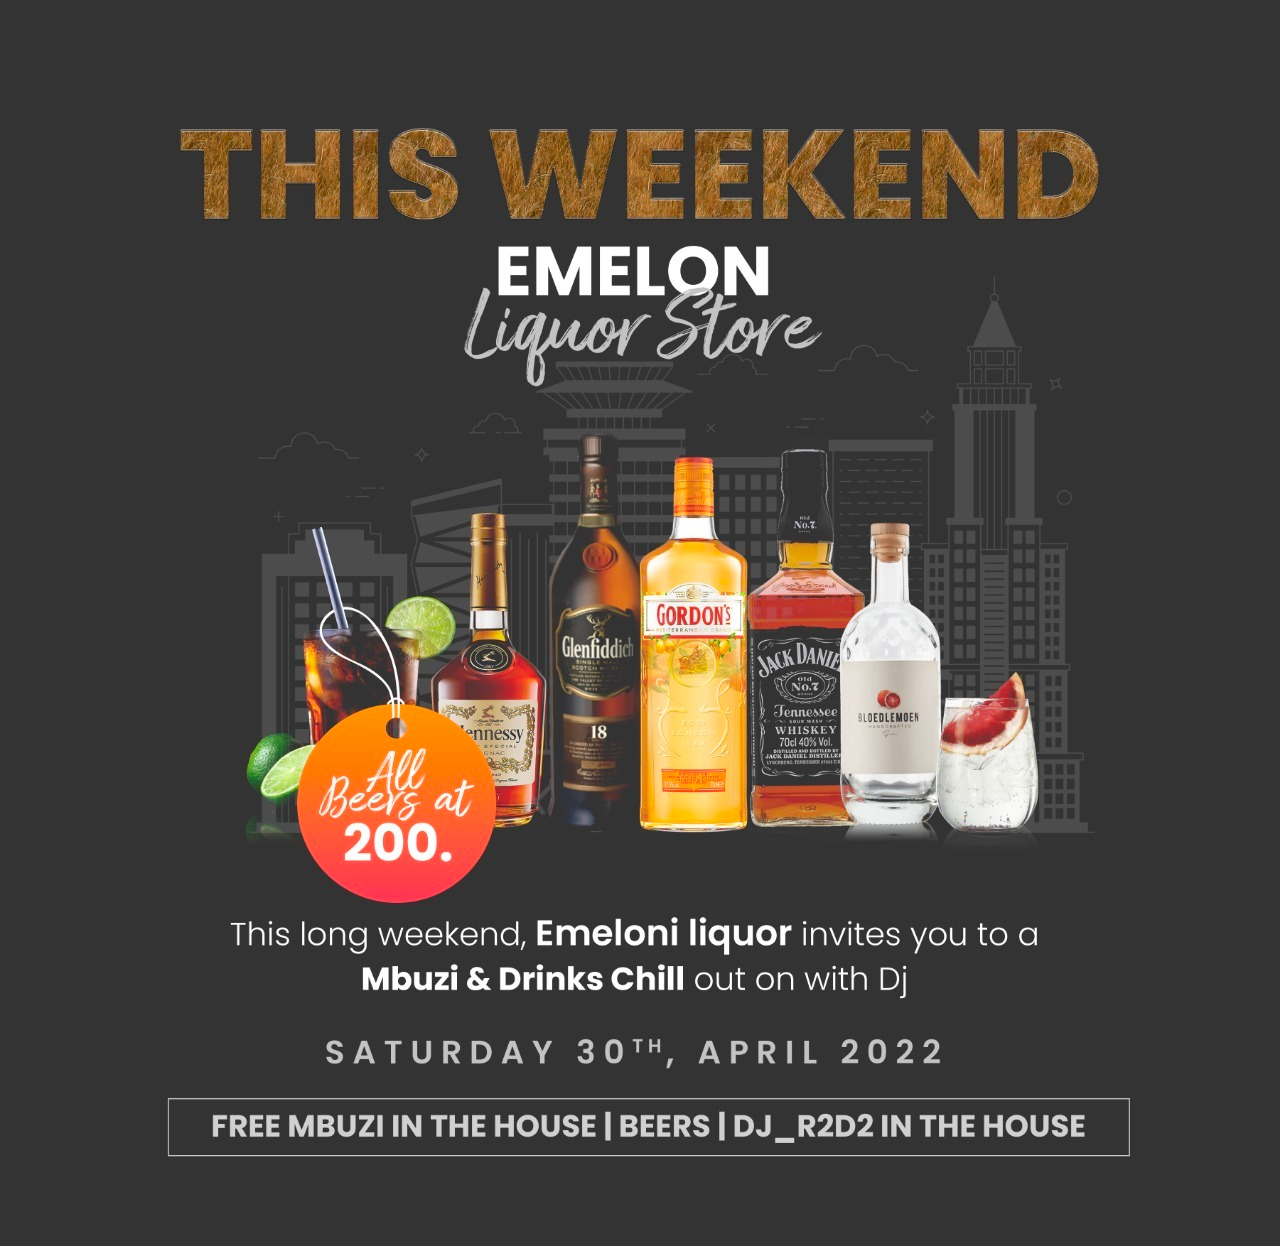 a pd
Ln Ch

nied
} (A

 

Novy

  

This long weekend, Emeloni liquor invites you to a
Mbuzi & Drinks Chill out on with Dj

SATURDAY 30", APRIL 2022

FREE MBUZI IN THE HOUSE | BEERS | DJ_R2D2 IN THE HOUSE